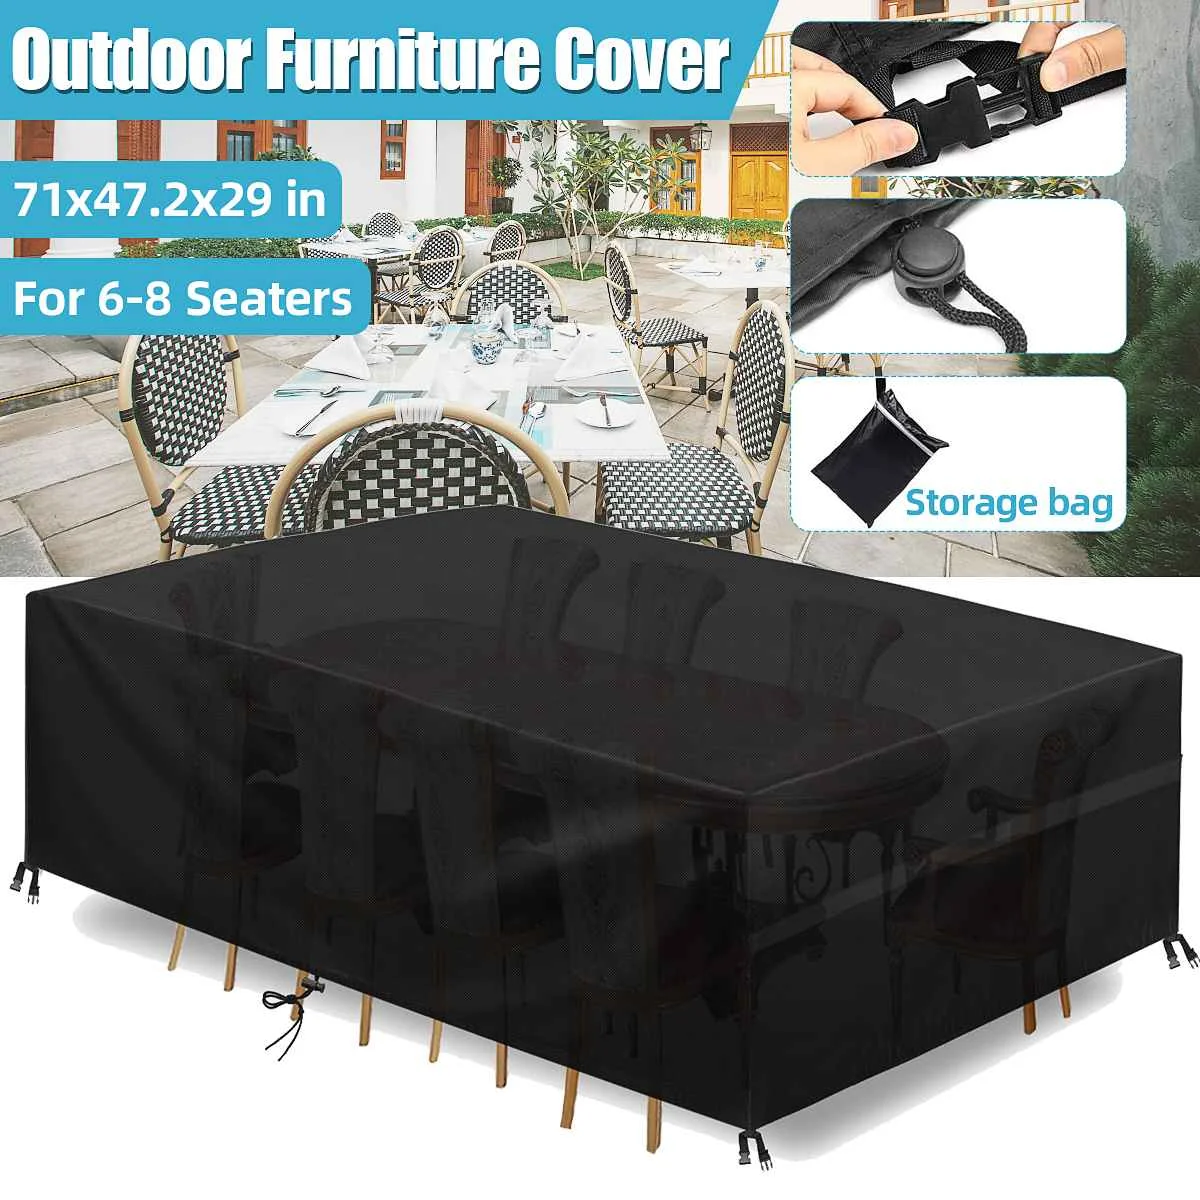 

600D For Garden Sofa Outdoor Garden Furniture Cover Waterproof Table Chair Rainproof Dustproof Cover Patio Protective Covers